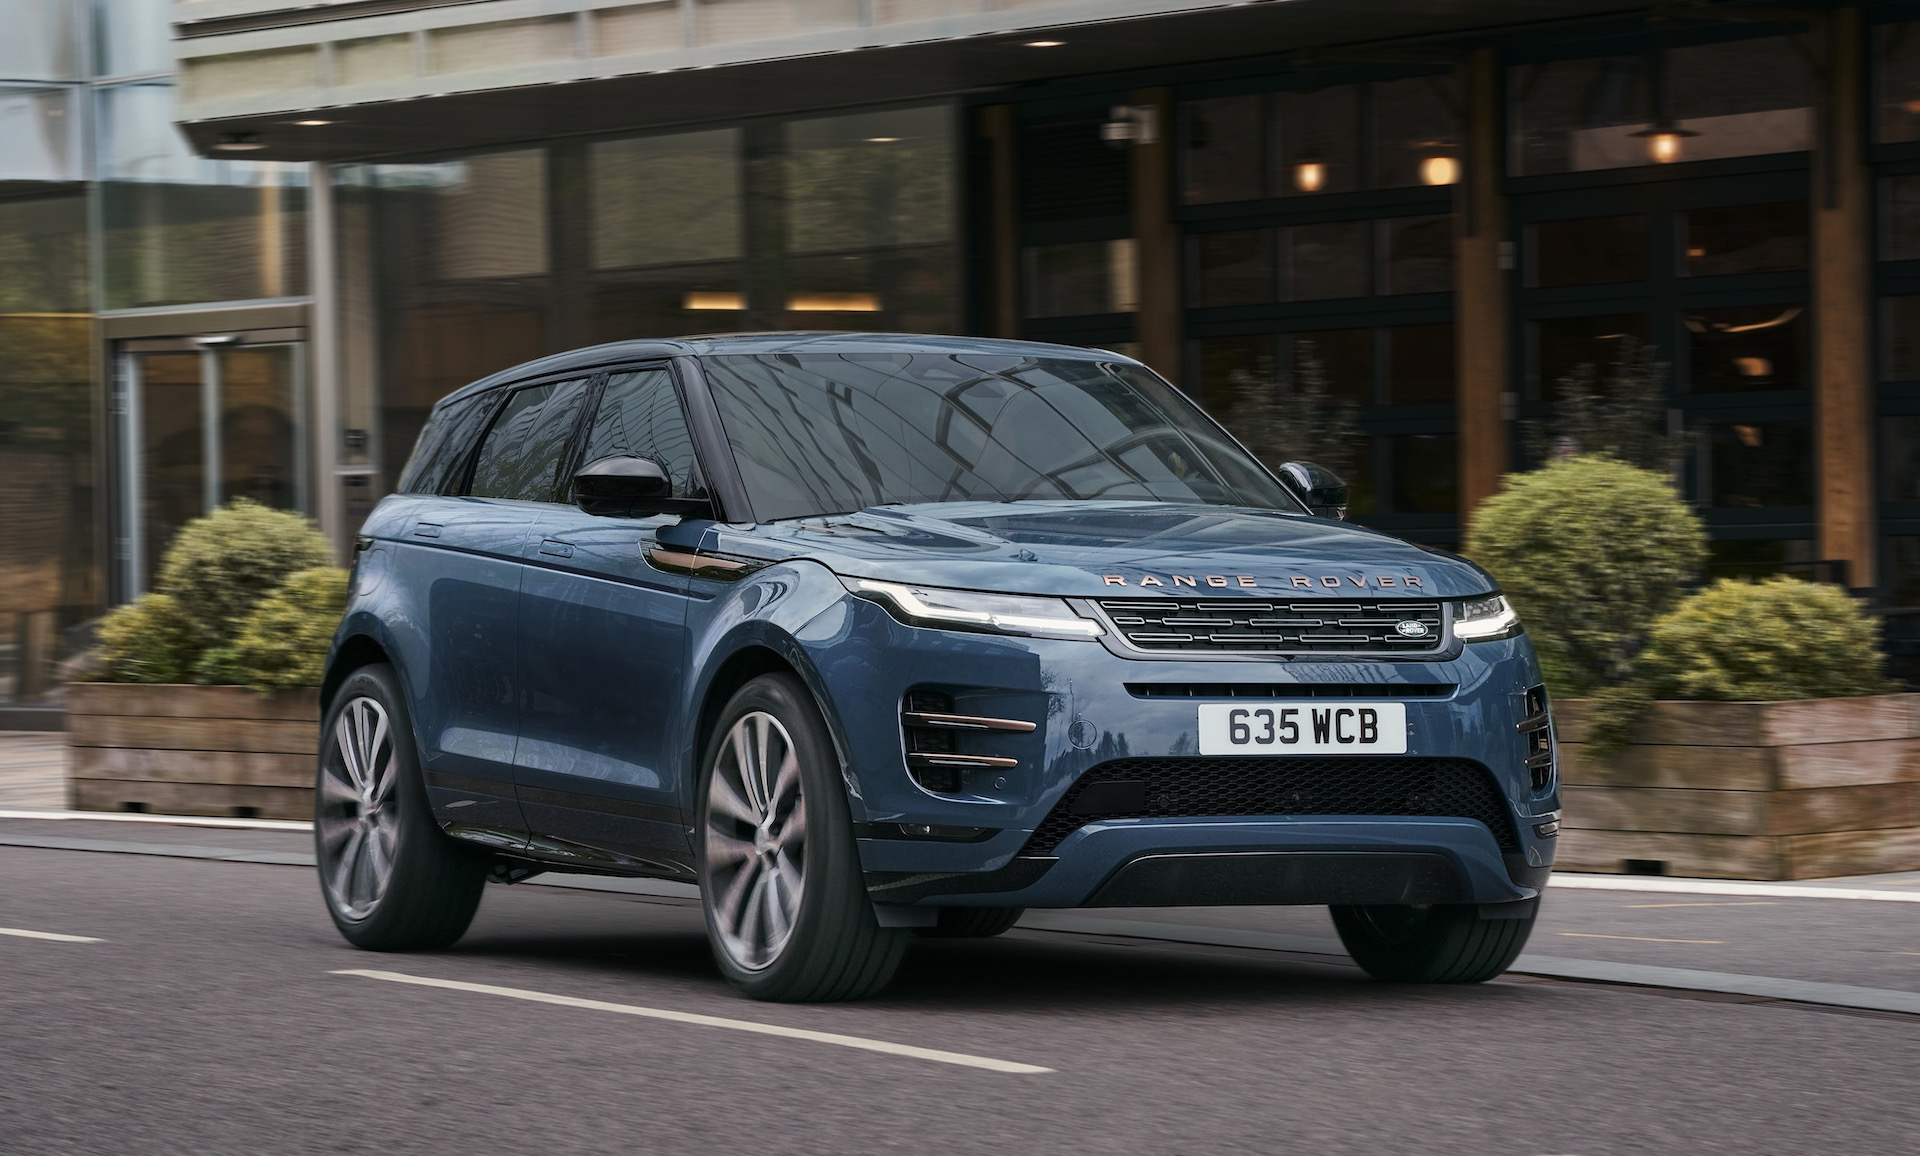 MY24 Range Rover Evoque update gains styling tweaks and added tech